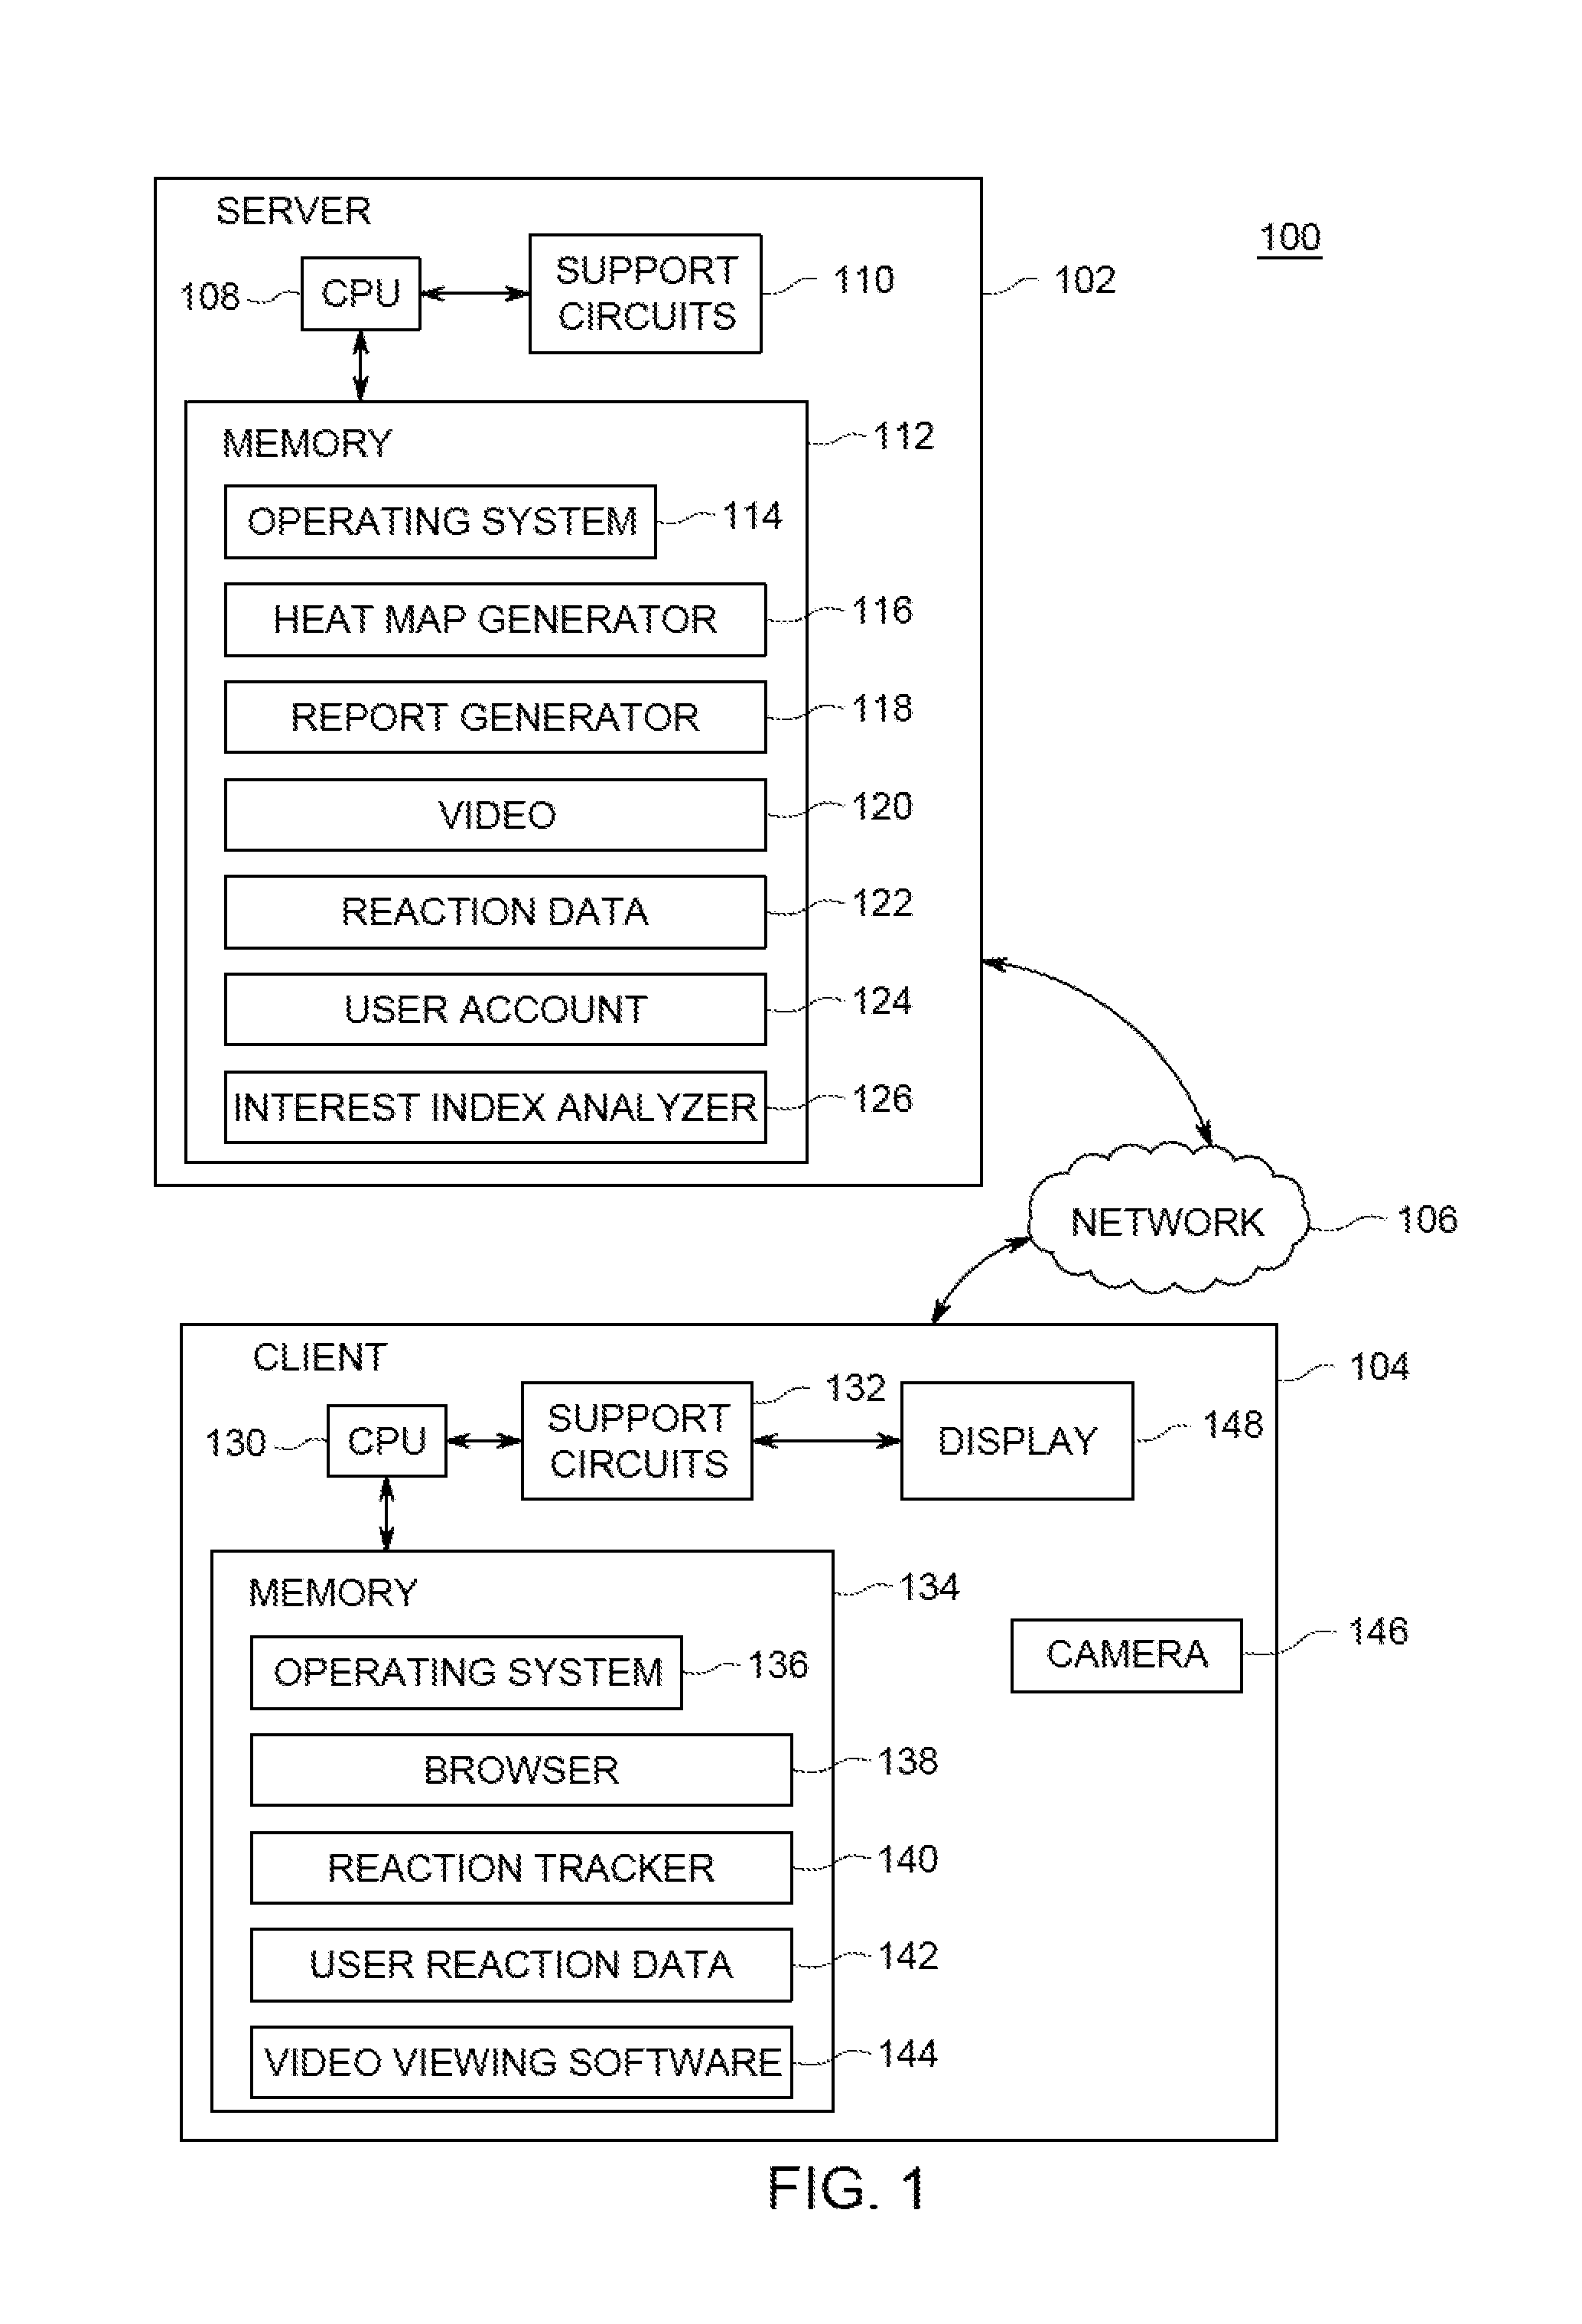 Method and apparatus for performing sentiment analysis based on user reactions to displayable content